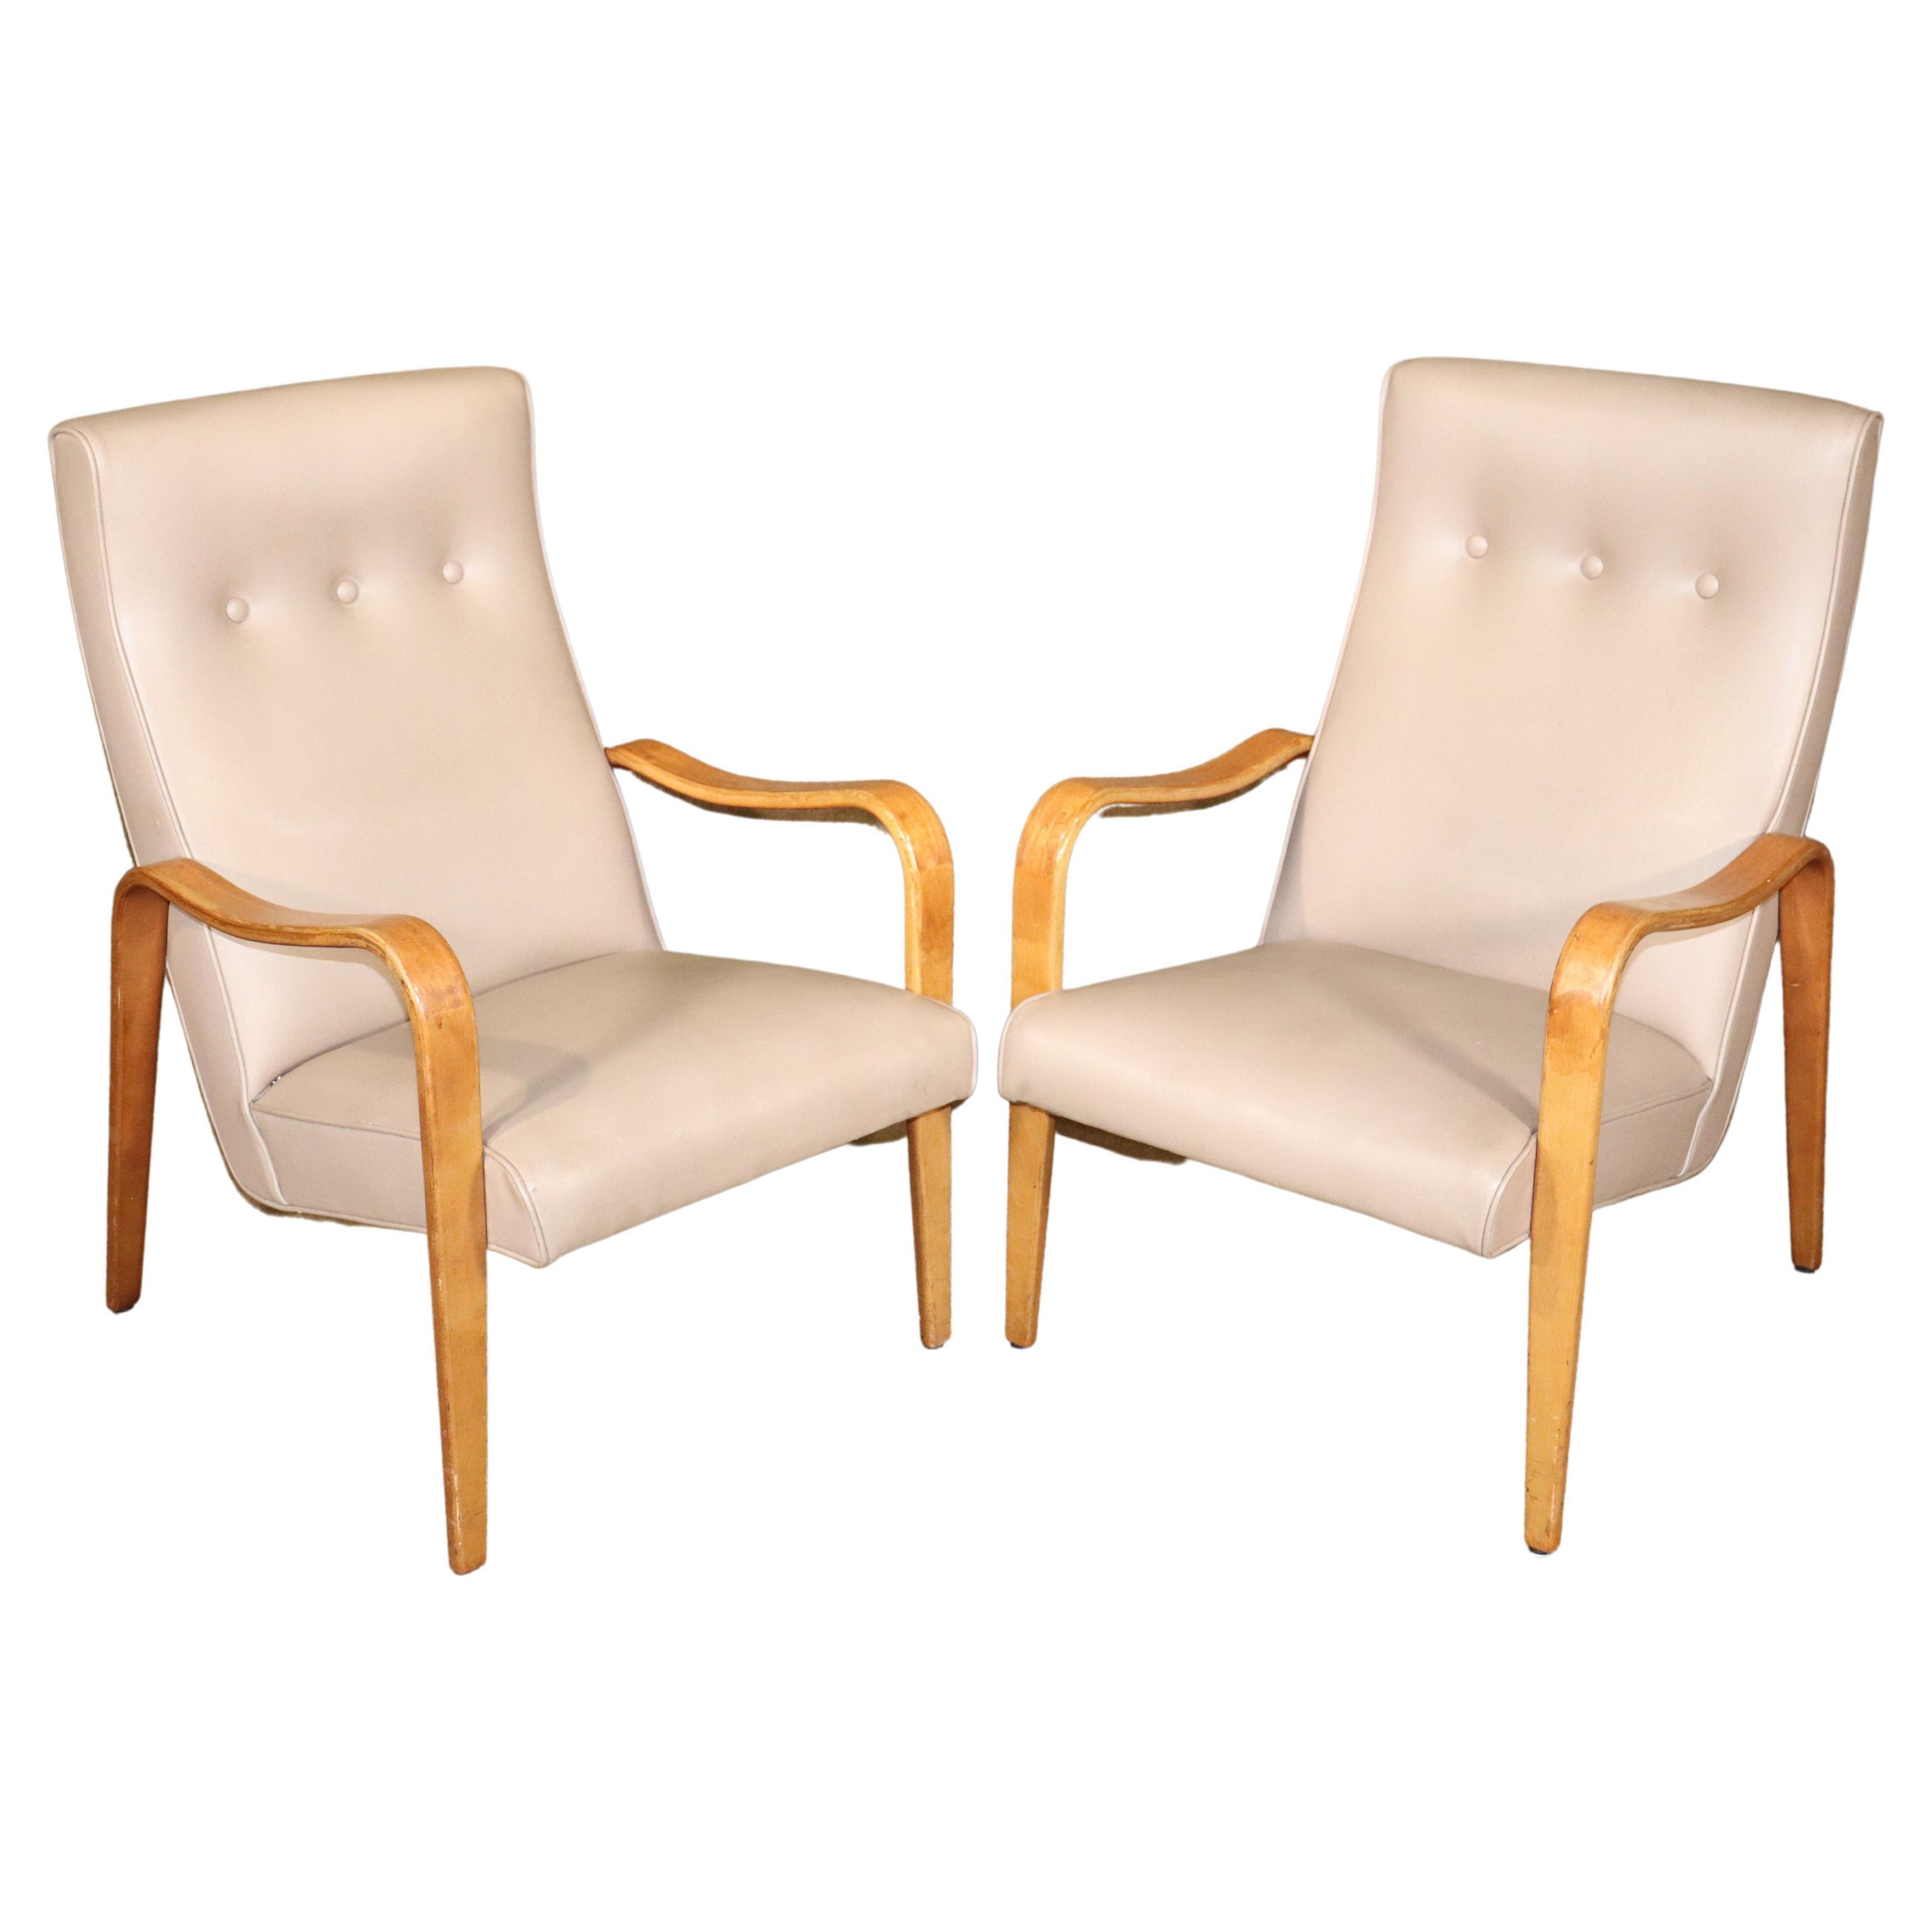 Thonet Bugholzsessel